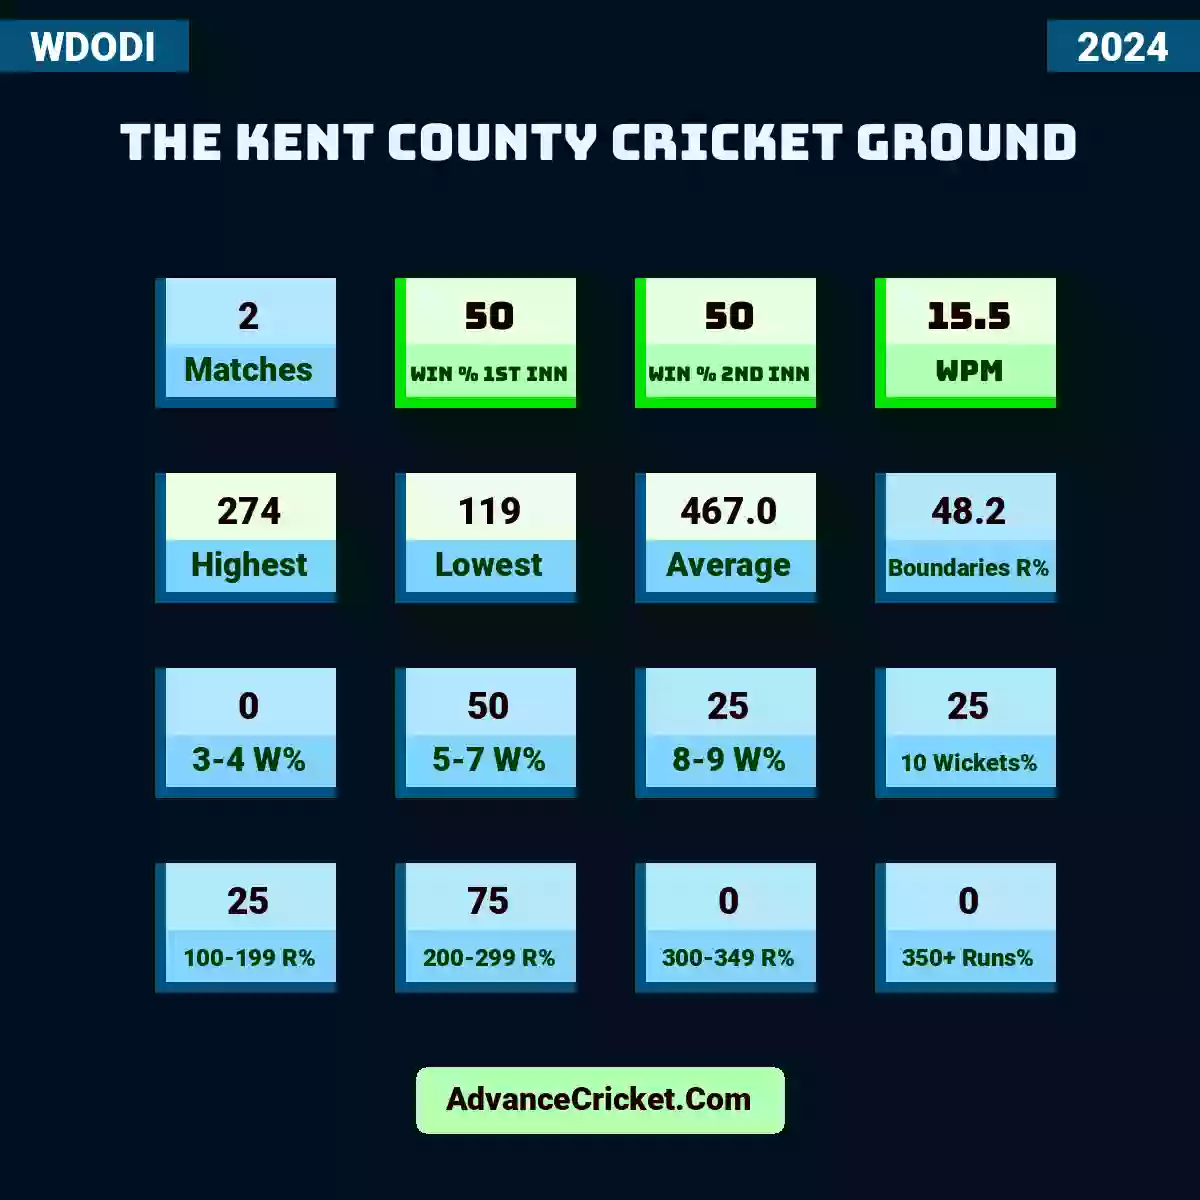 Image showing The Kent County Cricket Ground WDODI 2024 with Matches: 2, Win % 1st Inn: 50, Win % 2nd Inn: 50, WPM: 15.5, Highest: 274, Lowest: 119, Average: 467.0, Boundaries R%: 48.2, 3-4 W%: 0, 5-7 W%: 50, 8-9 W%: 25, 10 Wickets%: 25, 100-199 R%: 25, 200-299 R%: 75, 300-349 R%: 0, 350+ Runs%: 0.